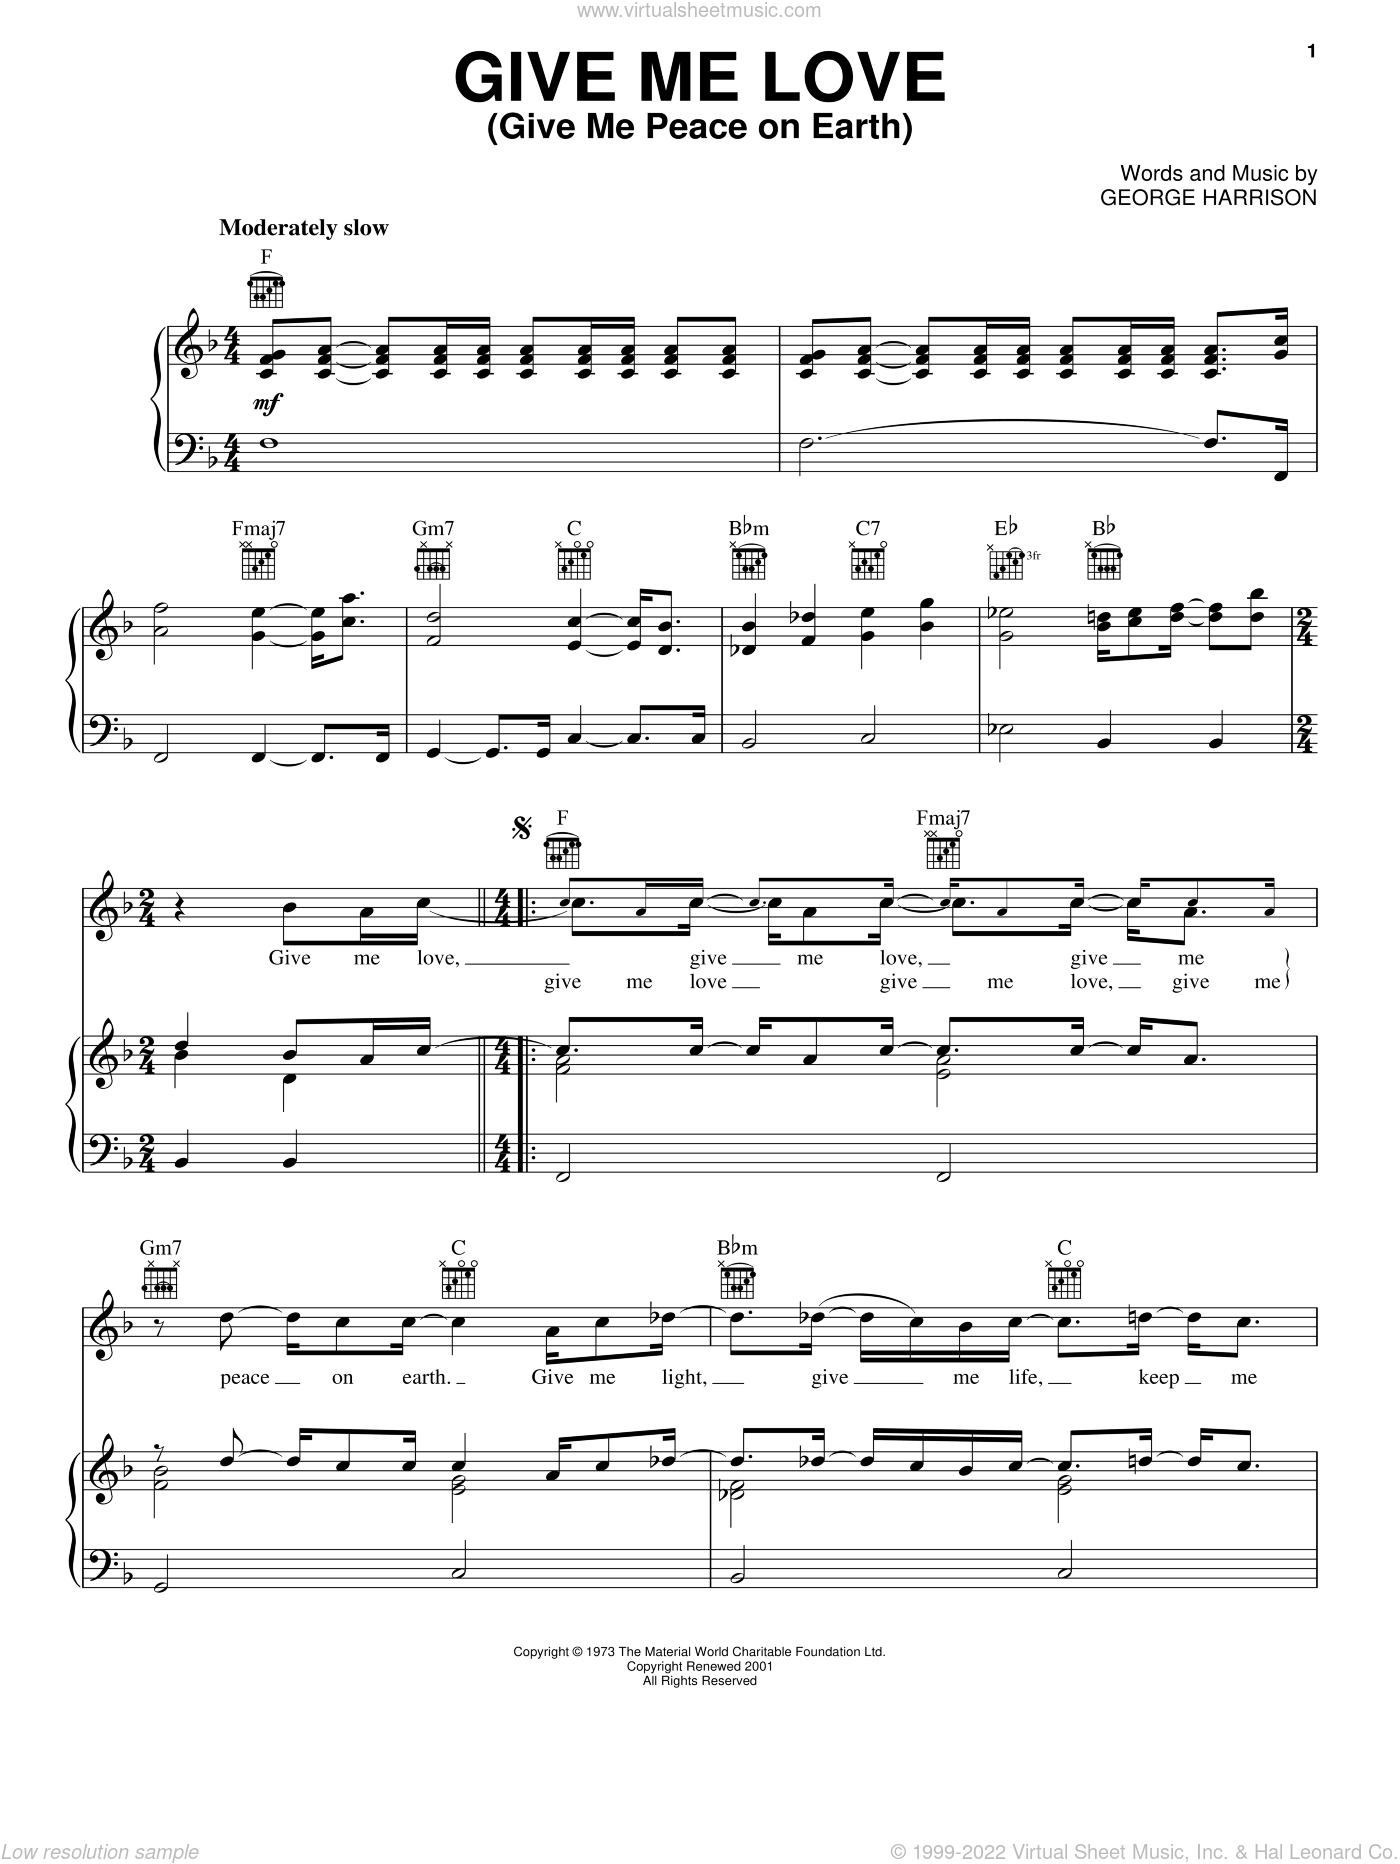 Harrison - Give Me Love (Give Me Peace On Earth) sheet music for voice, piano or guitar